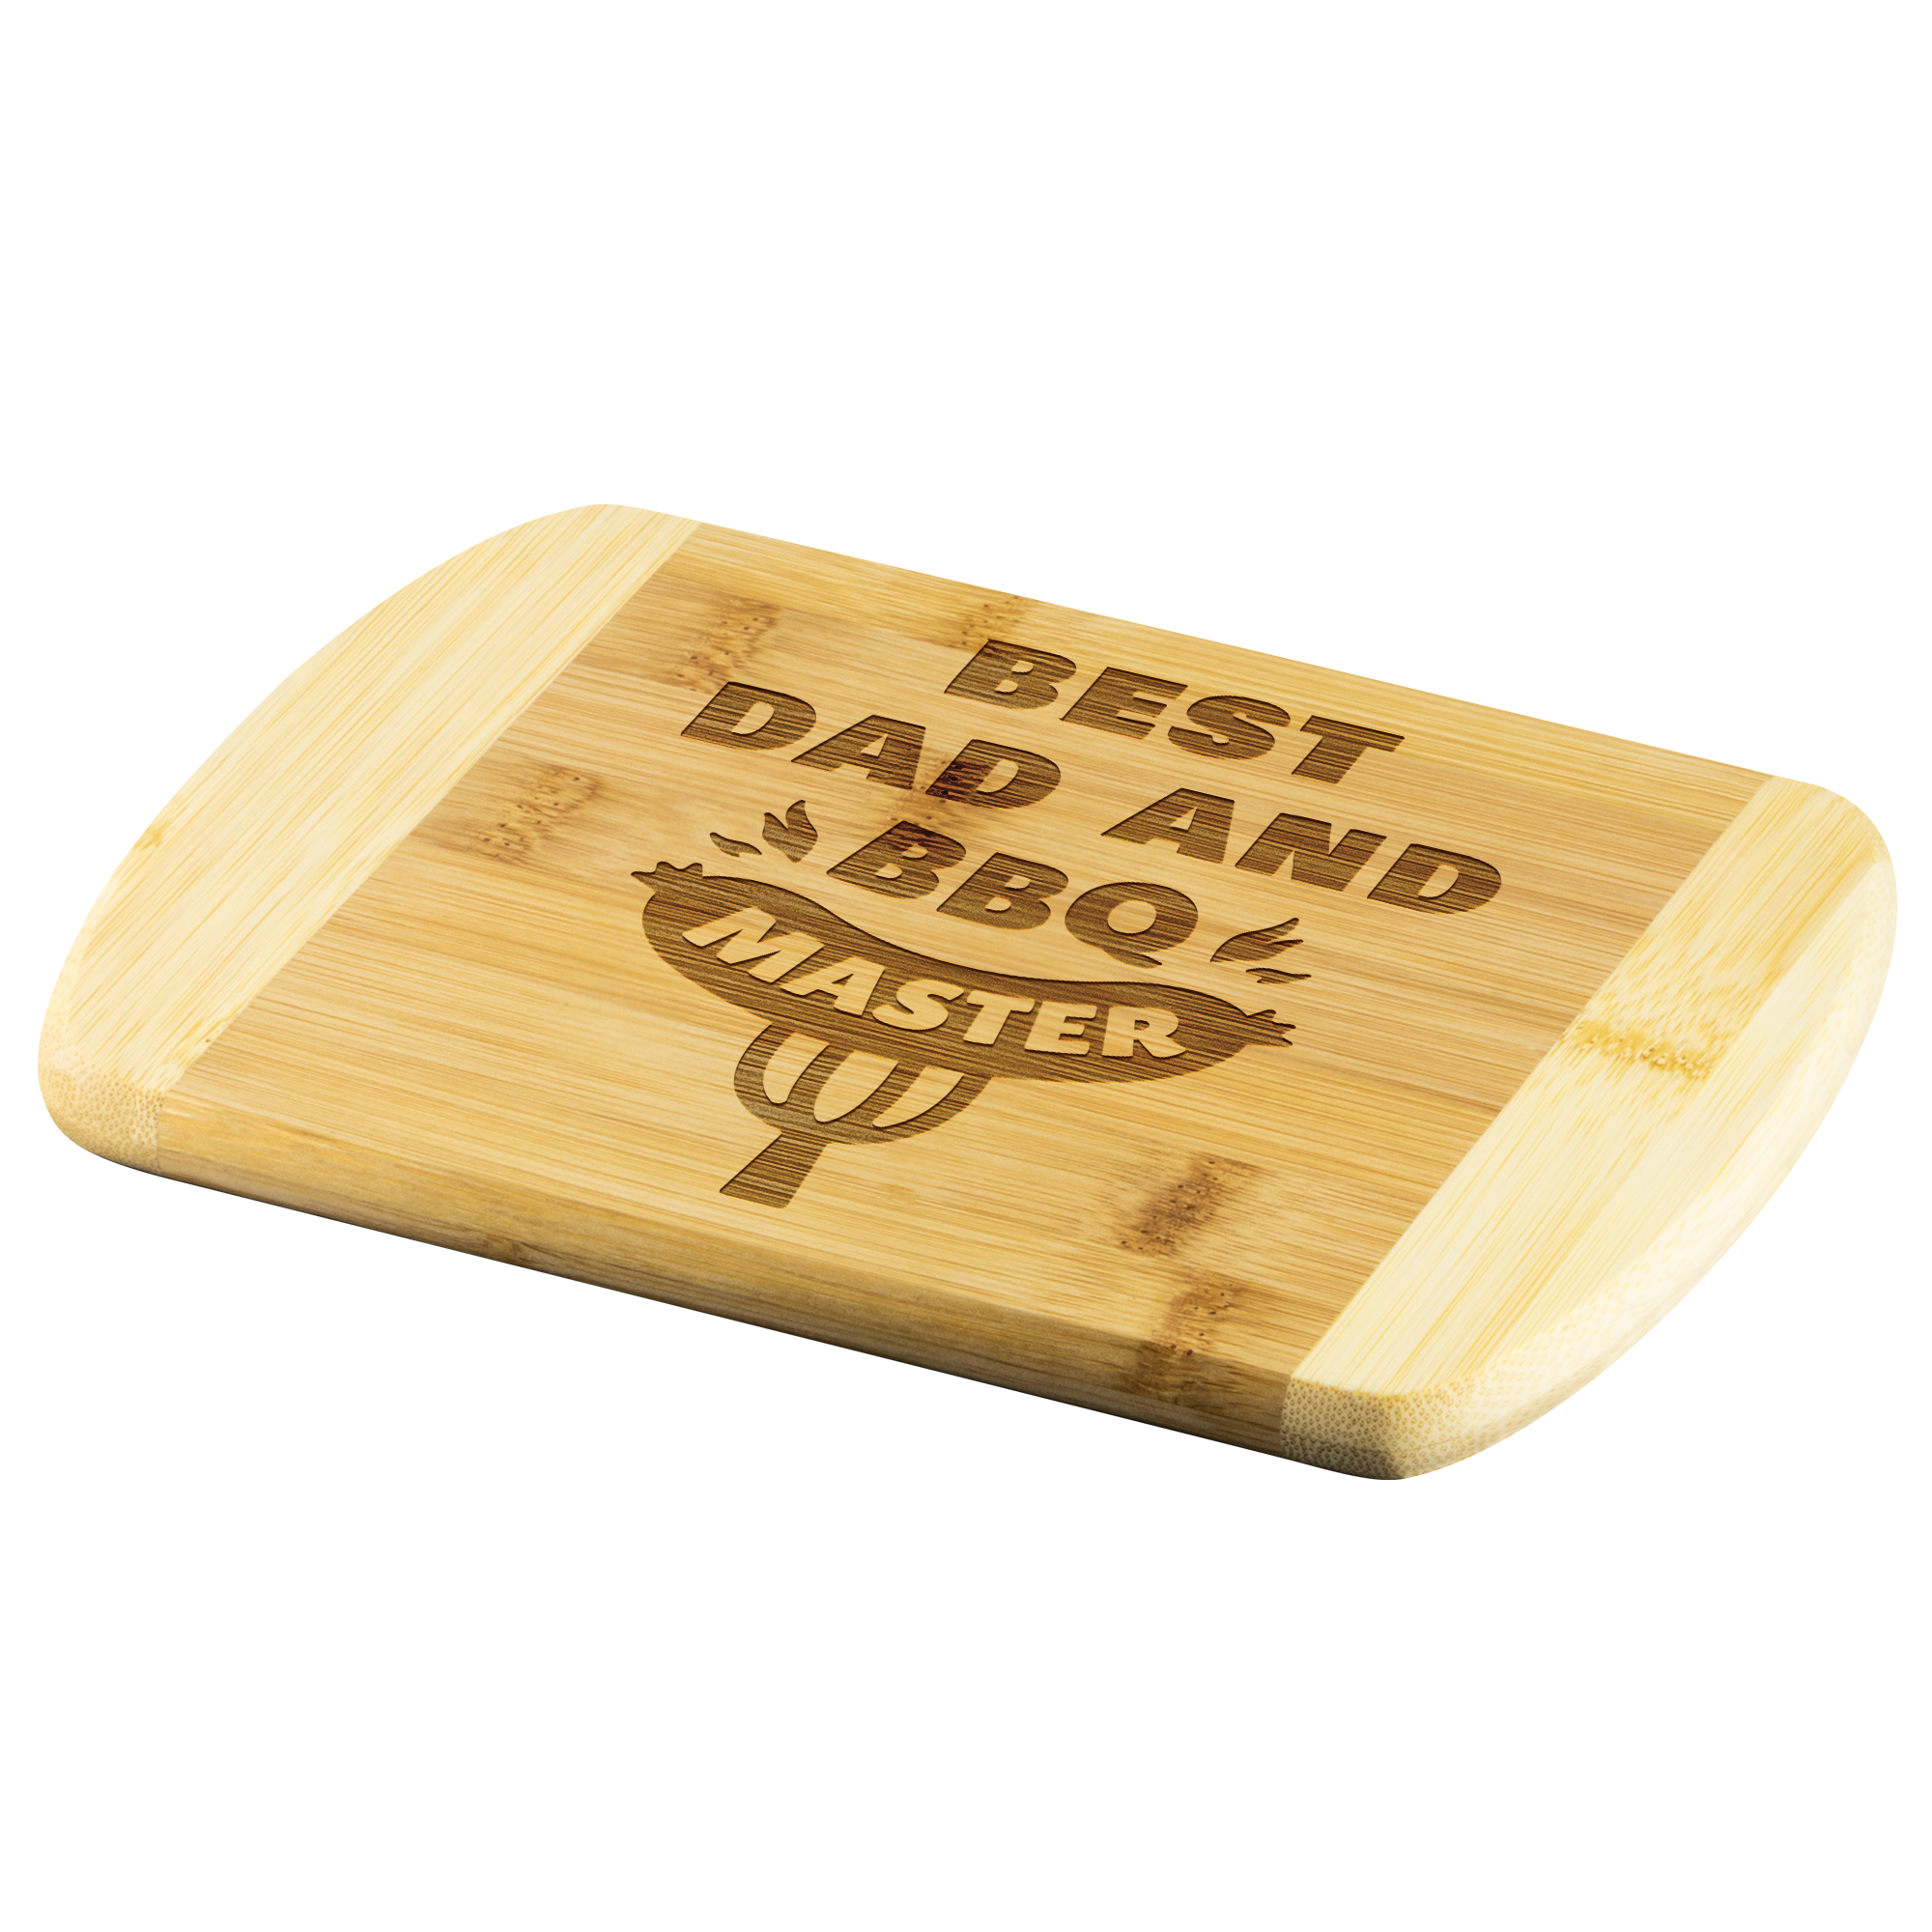 Best Dad and BBQ Master Wood Cutting Board